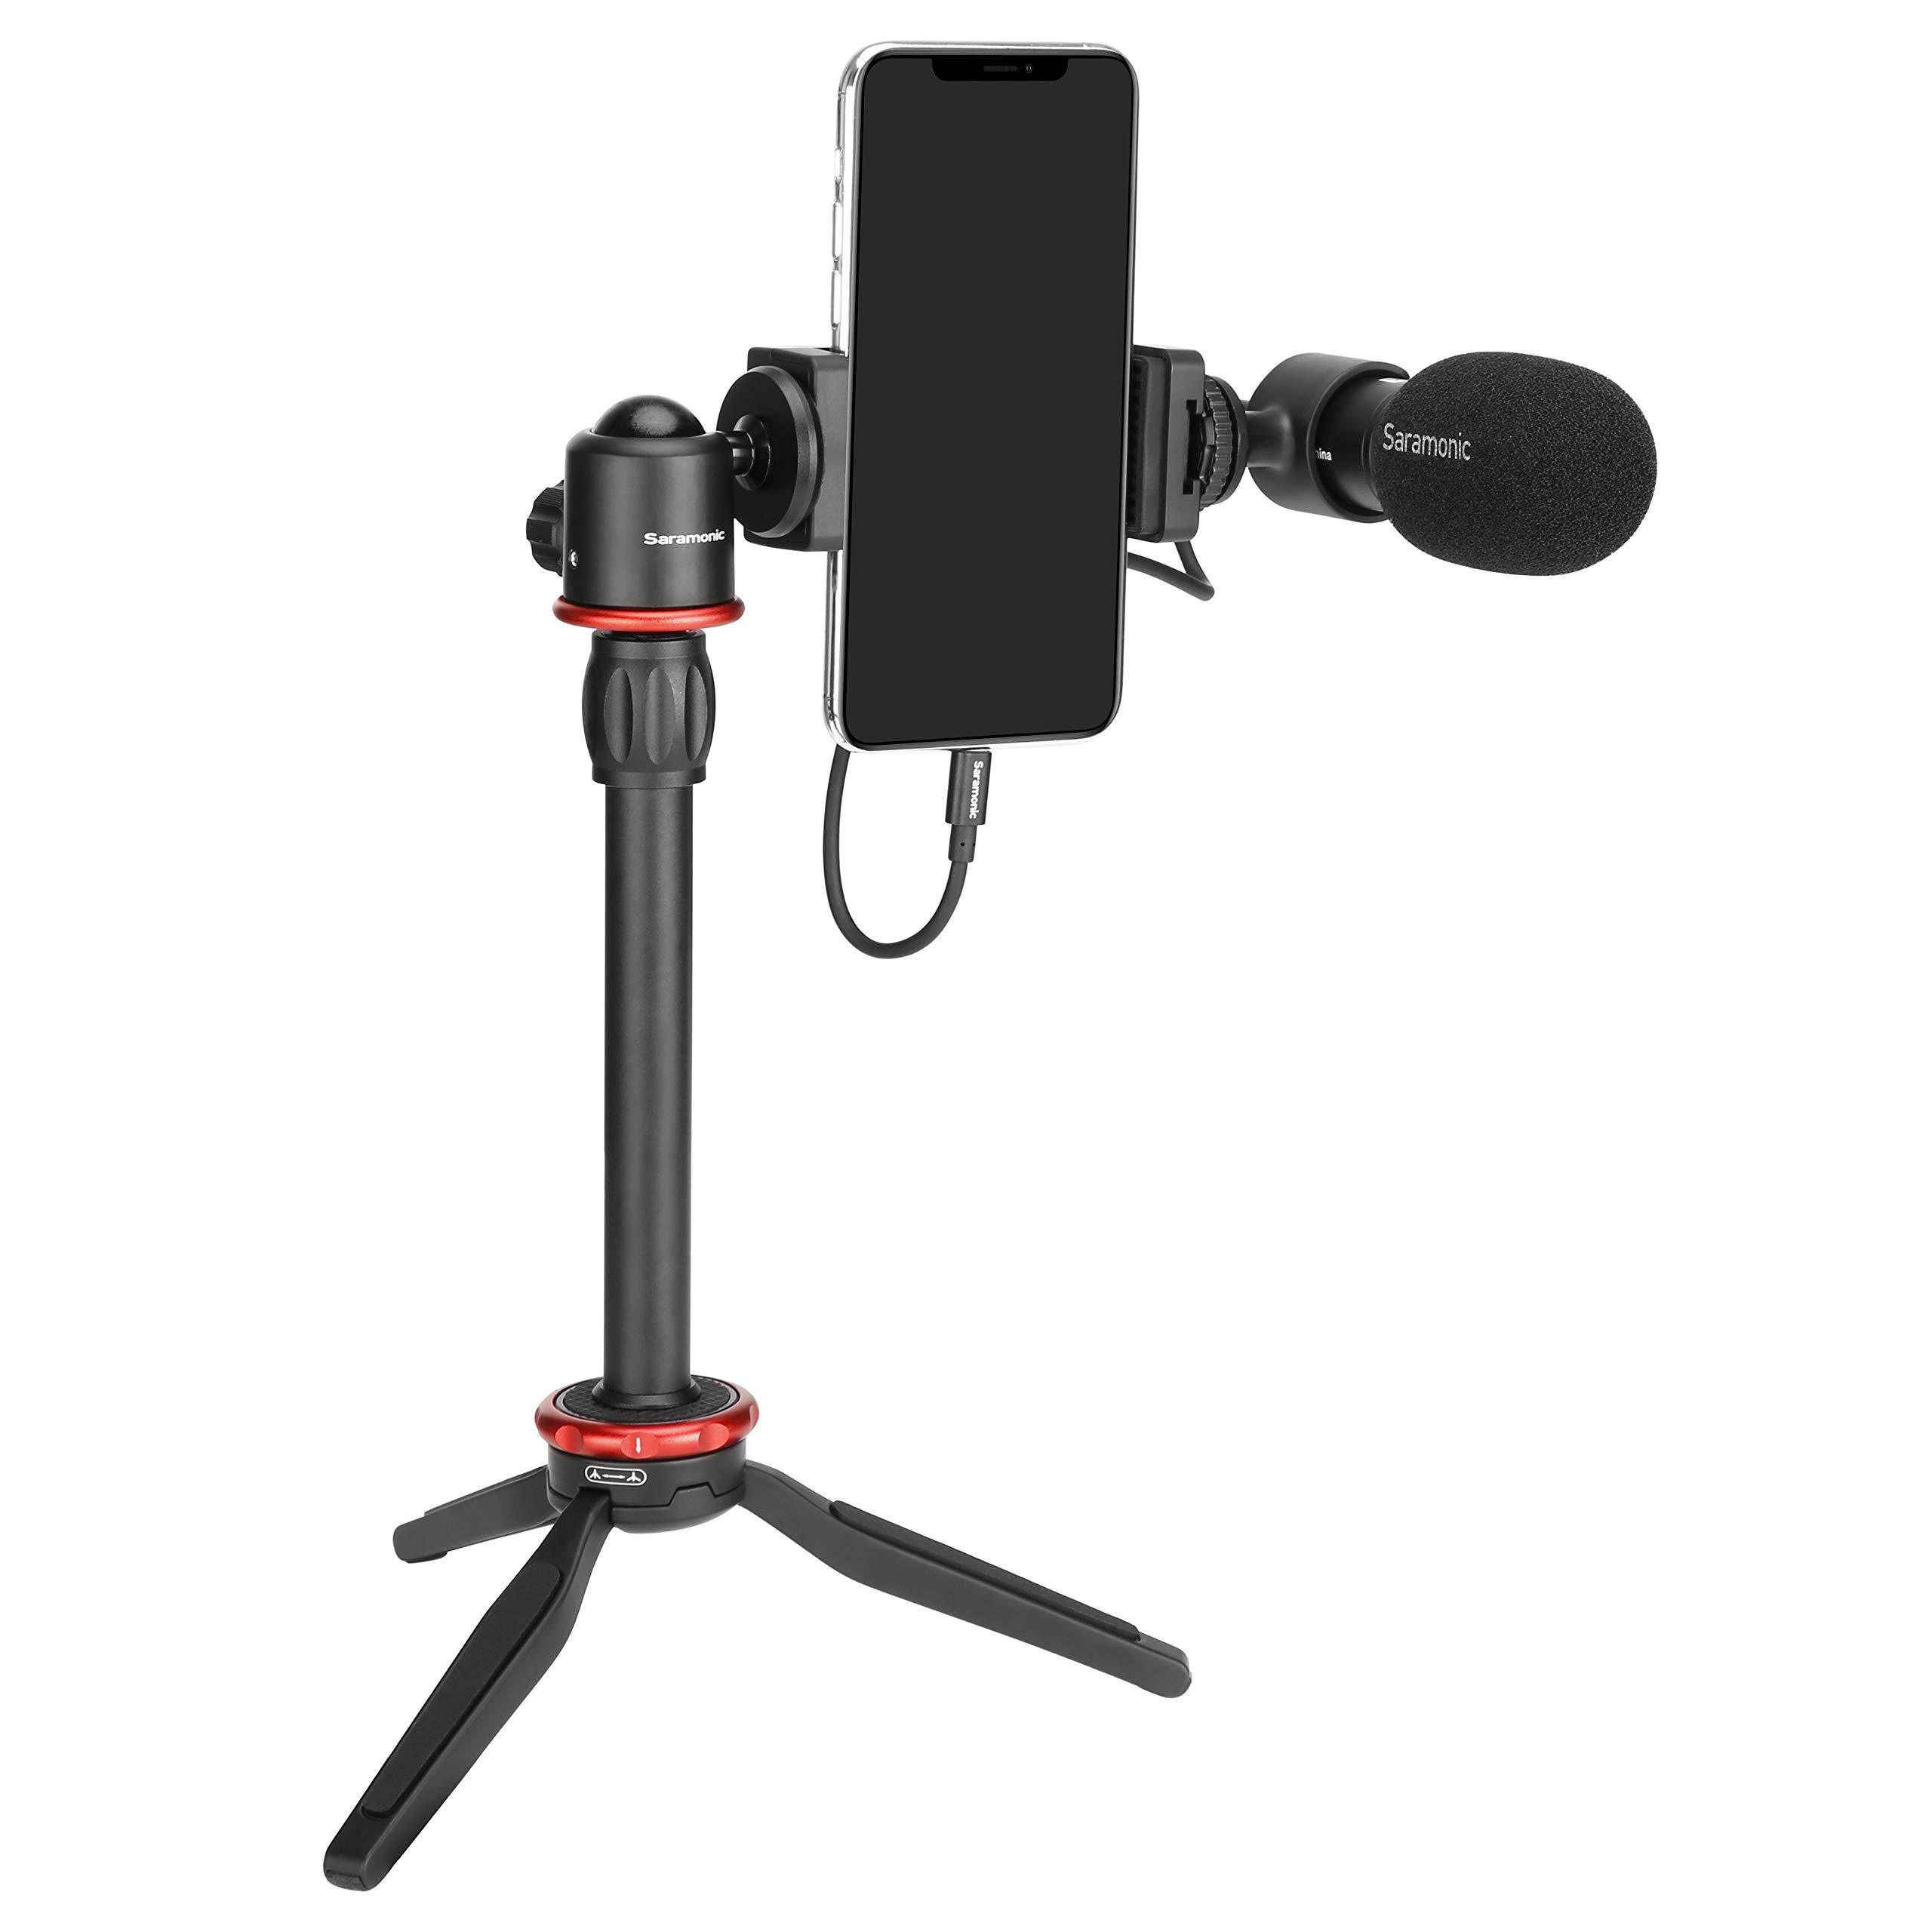 saramonic smartphone video and vlogging kit for iphone & android with stereo microphone, phone mount, tripod, headphone, ligh